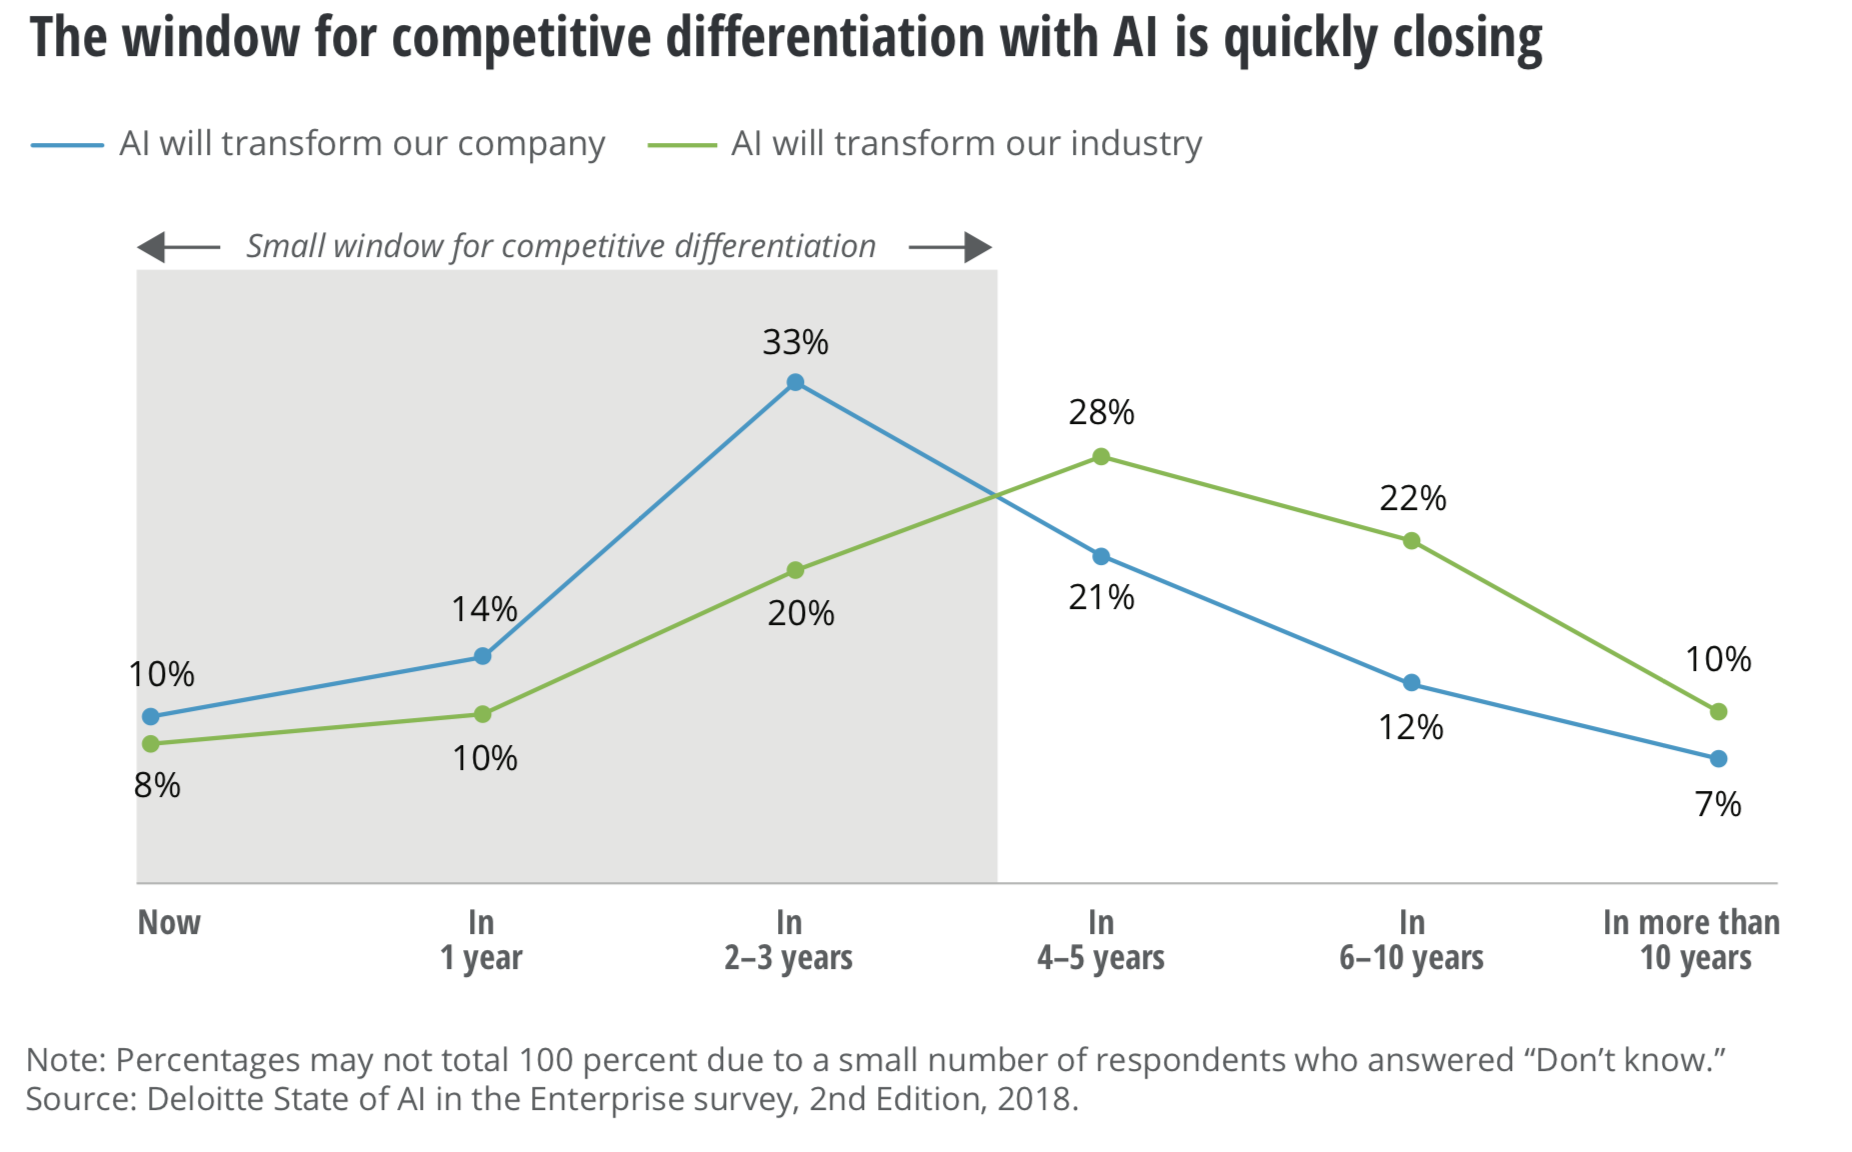 Window for competitive differentiation with AI is quicly closing